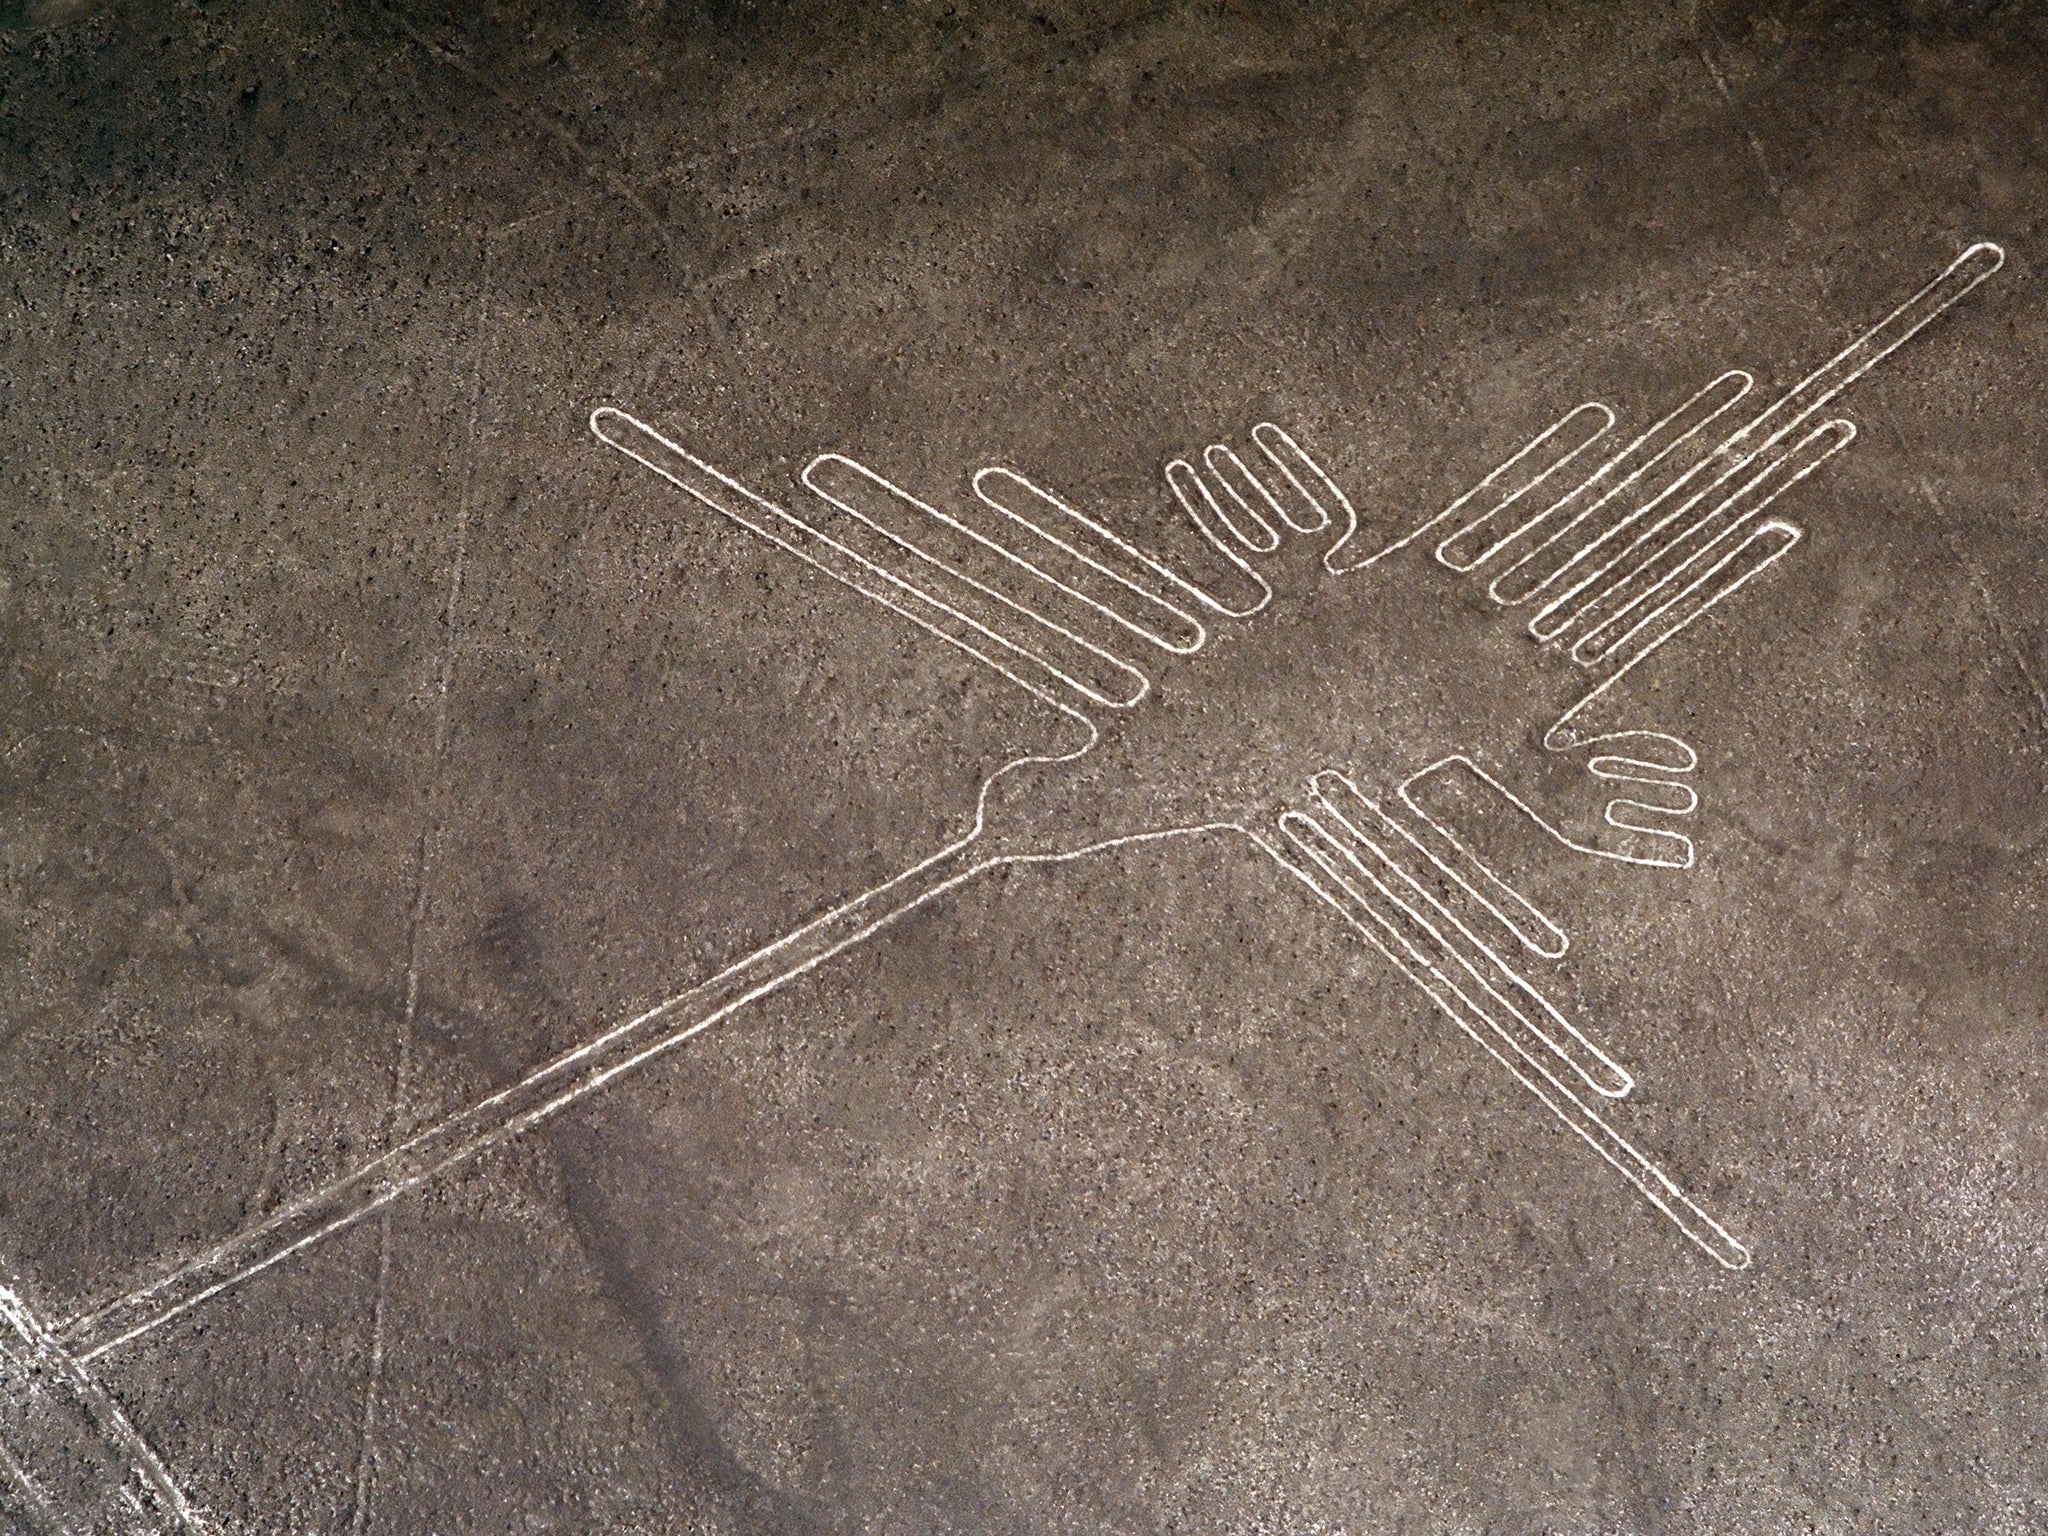 PERU NAZCA LINES AERIAL OF THE DRAWING OF A HUMMINGBIRD